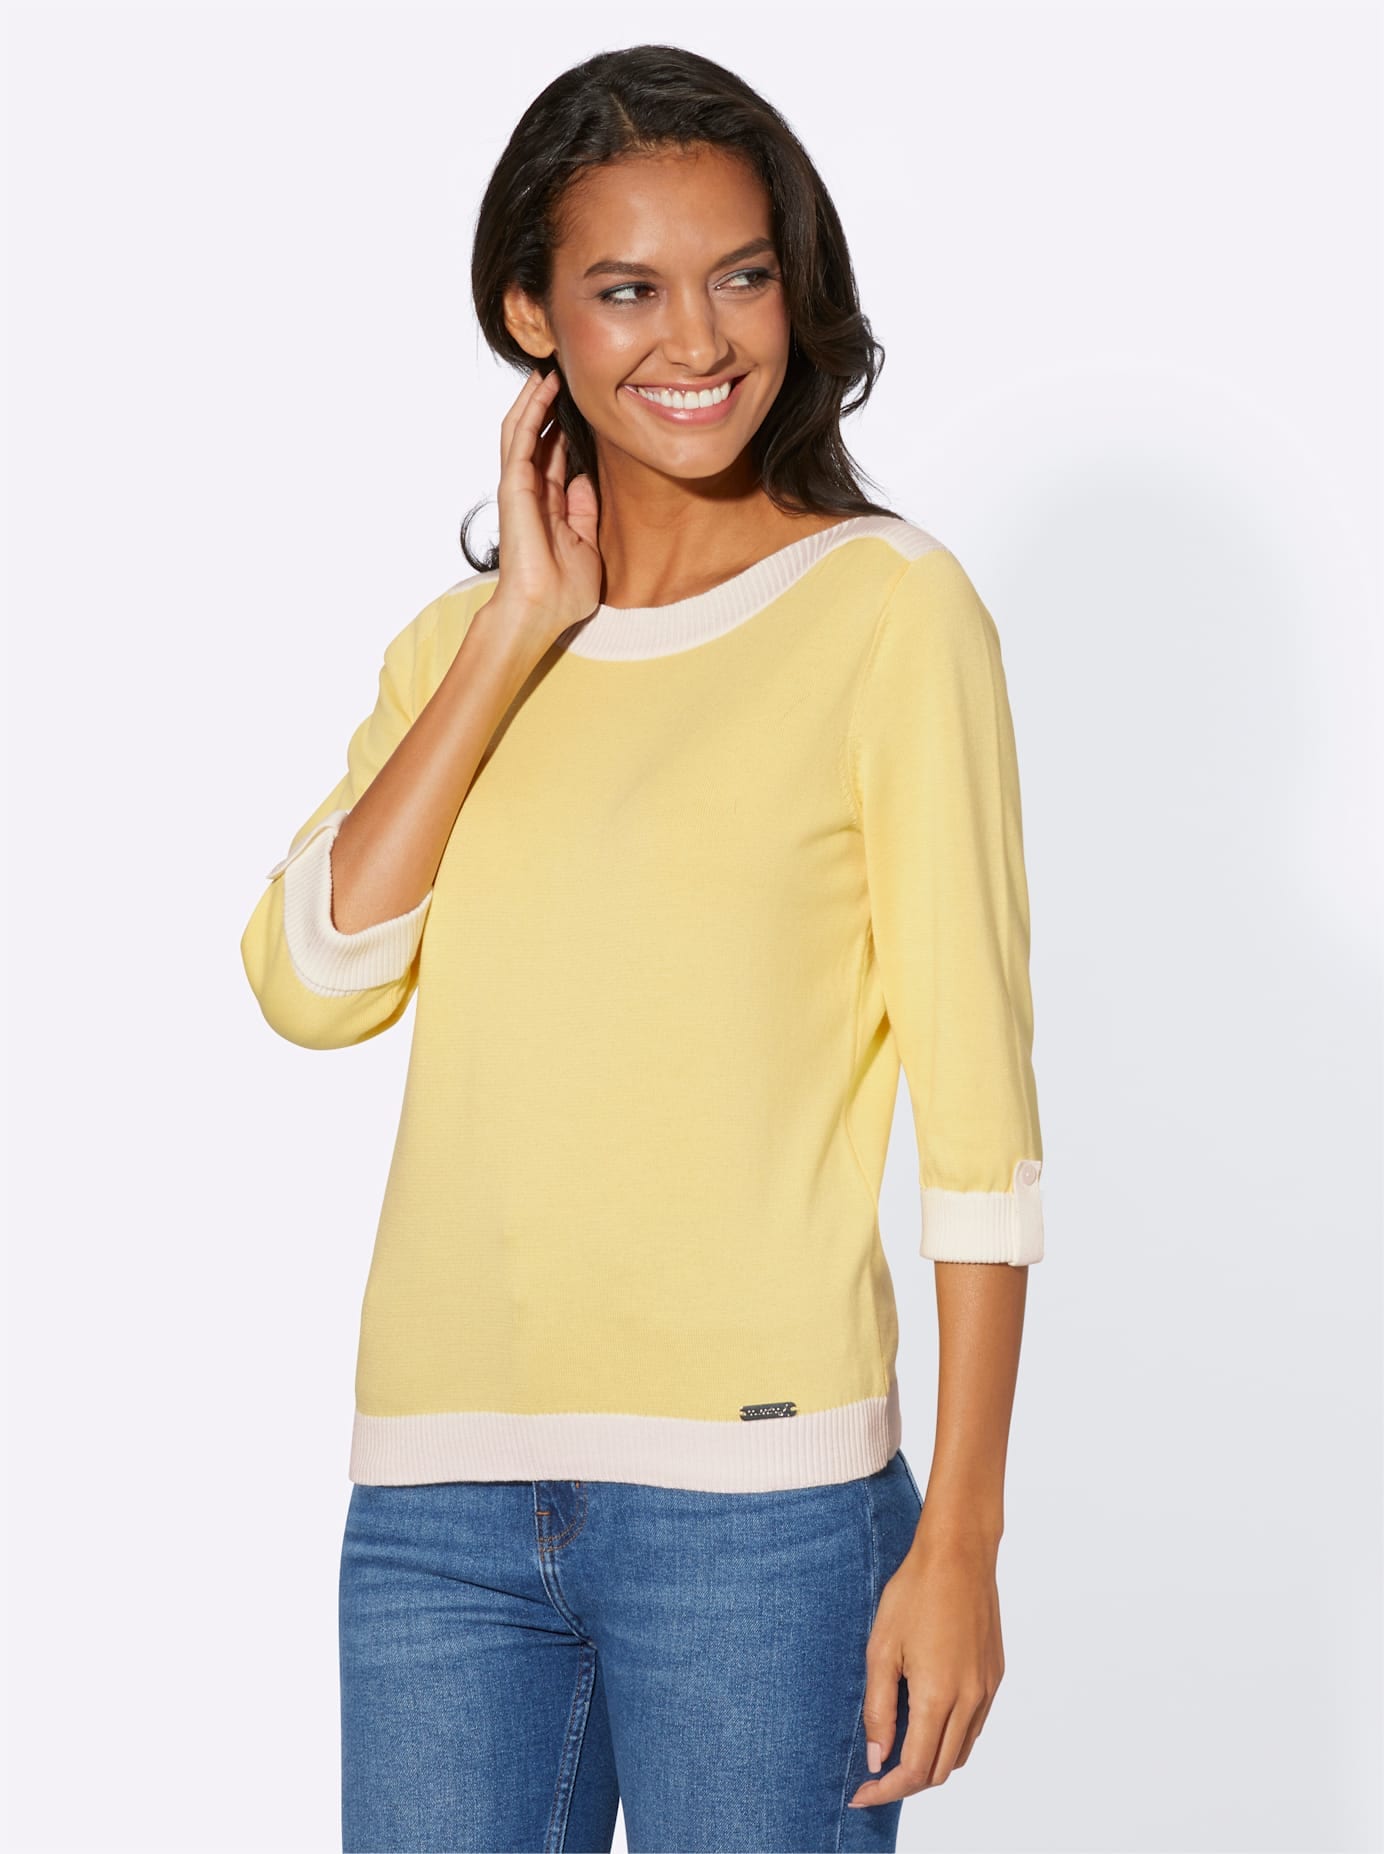 Casual Looks 3/4 Arm-Pullover »Pullover« von Casual Looks